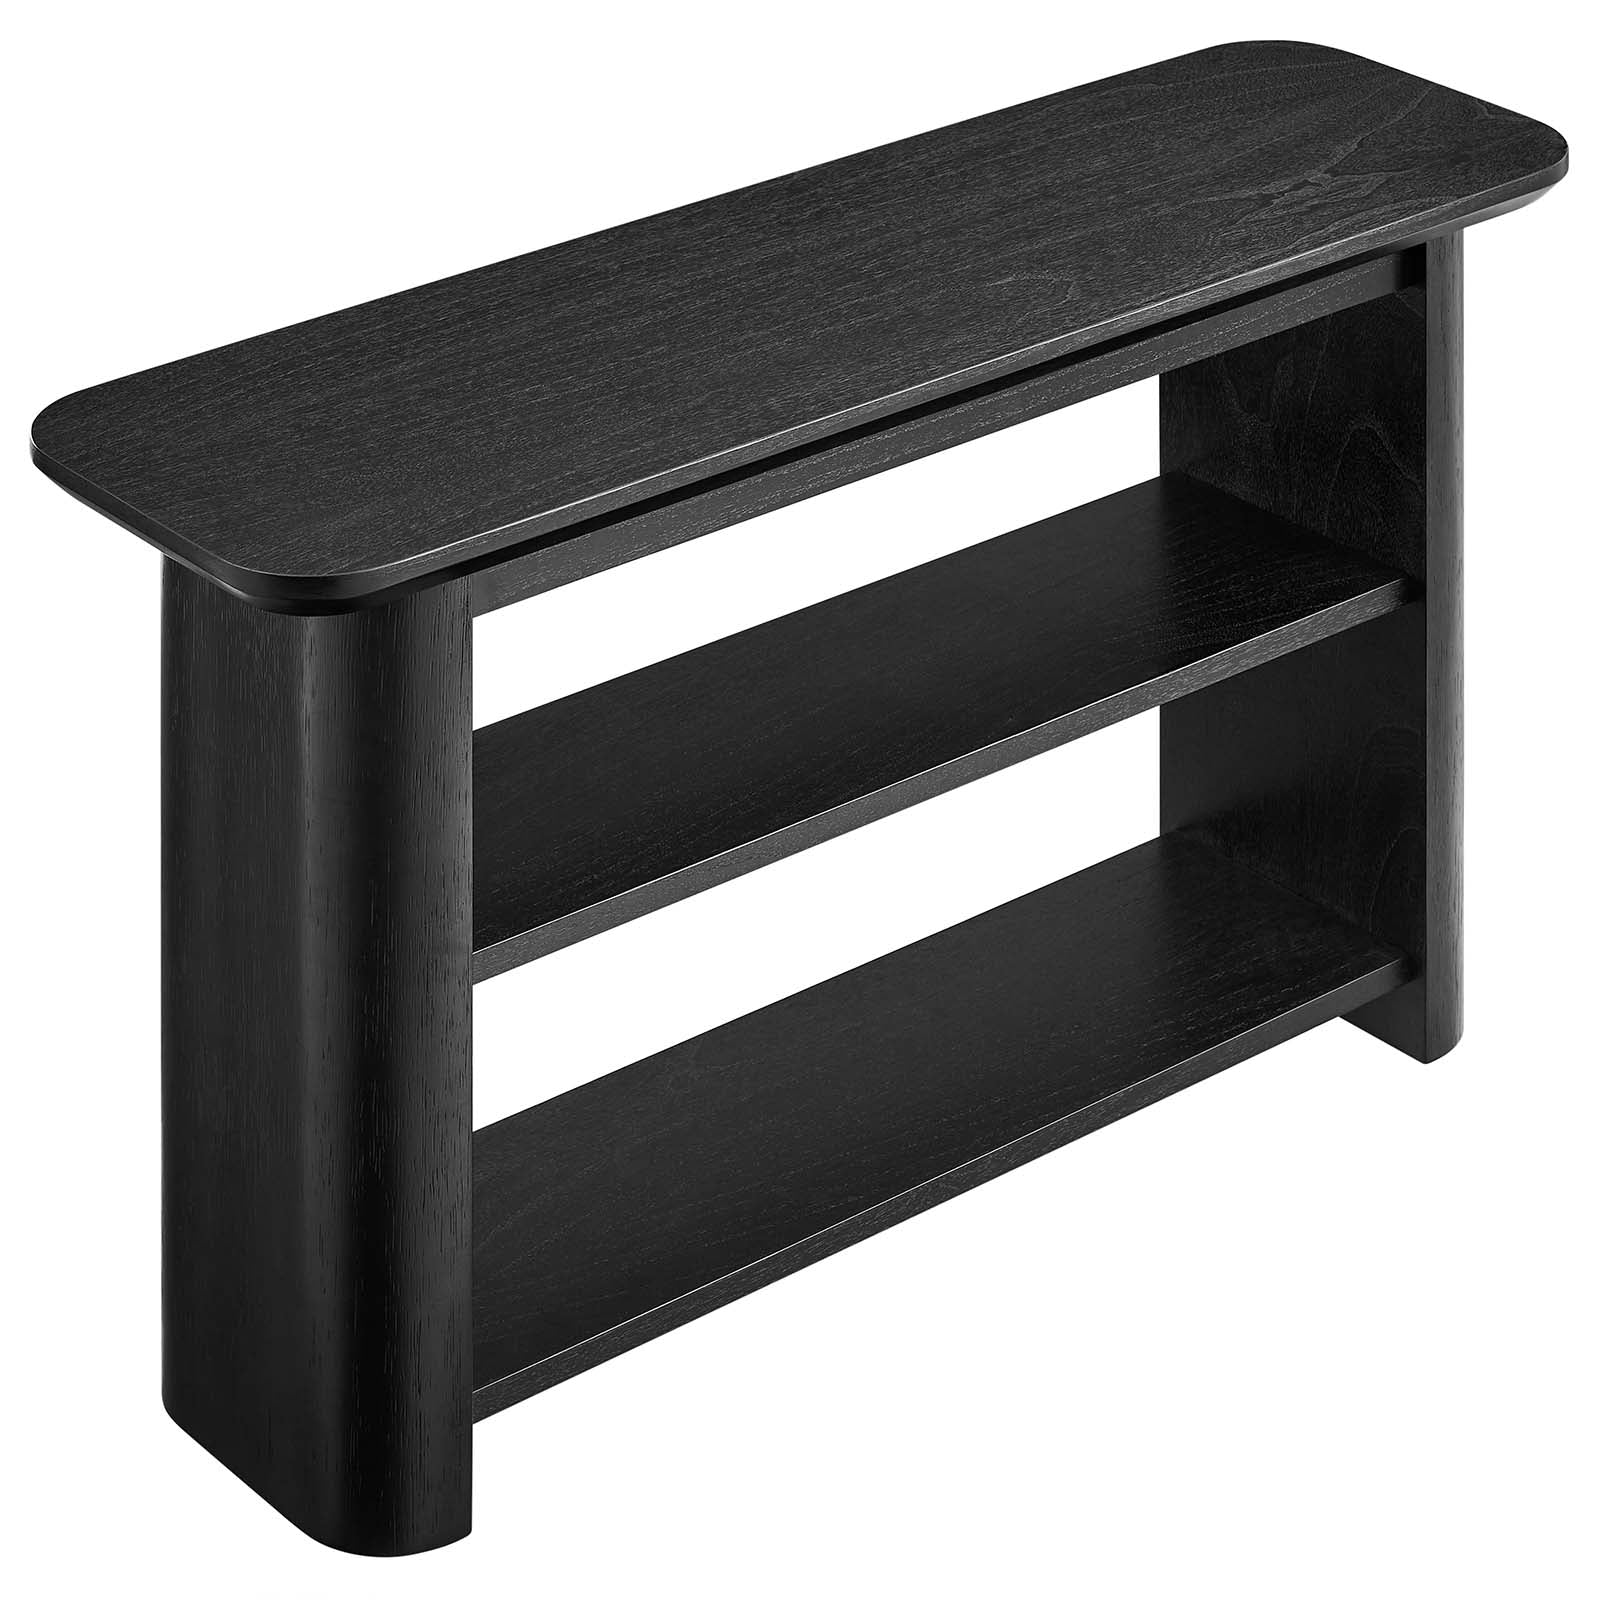 Calix 57” Console Table - East Shore Modern Home Furnishings